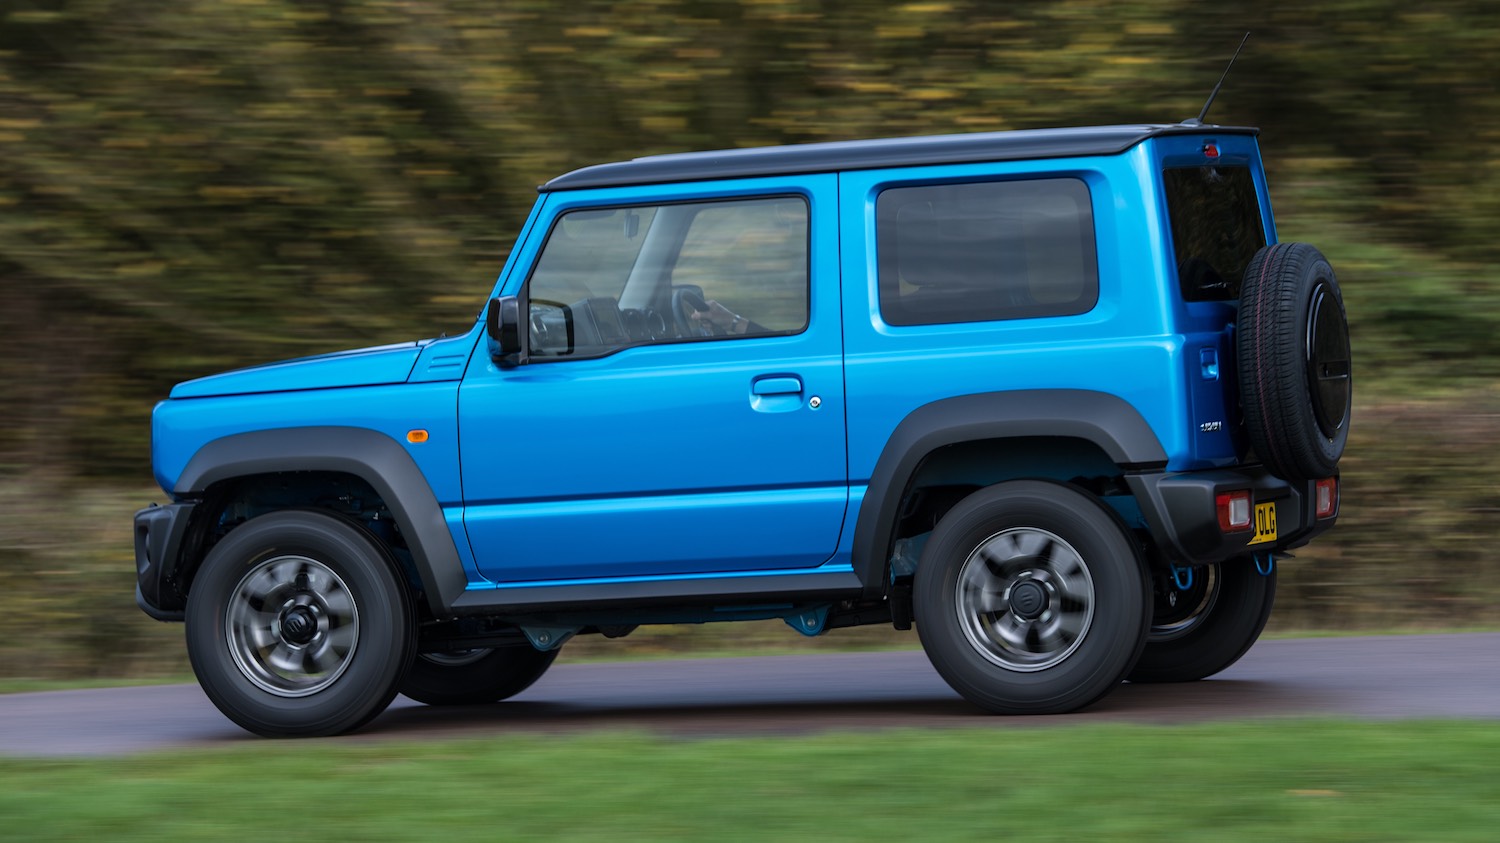 Tom Scanlan takes the All-New Jimny on and off-road 10